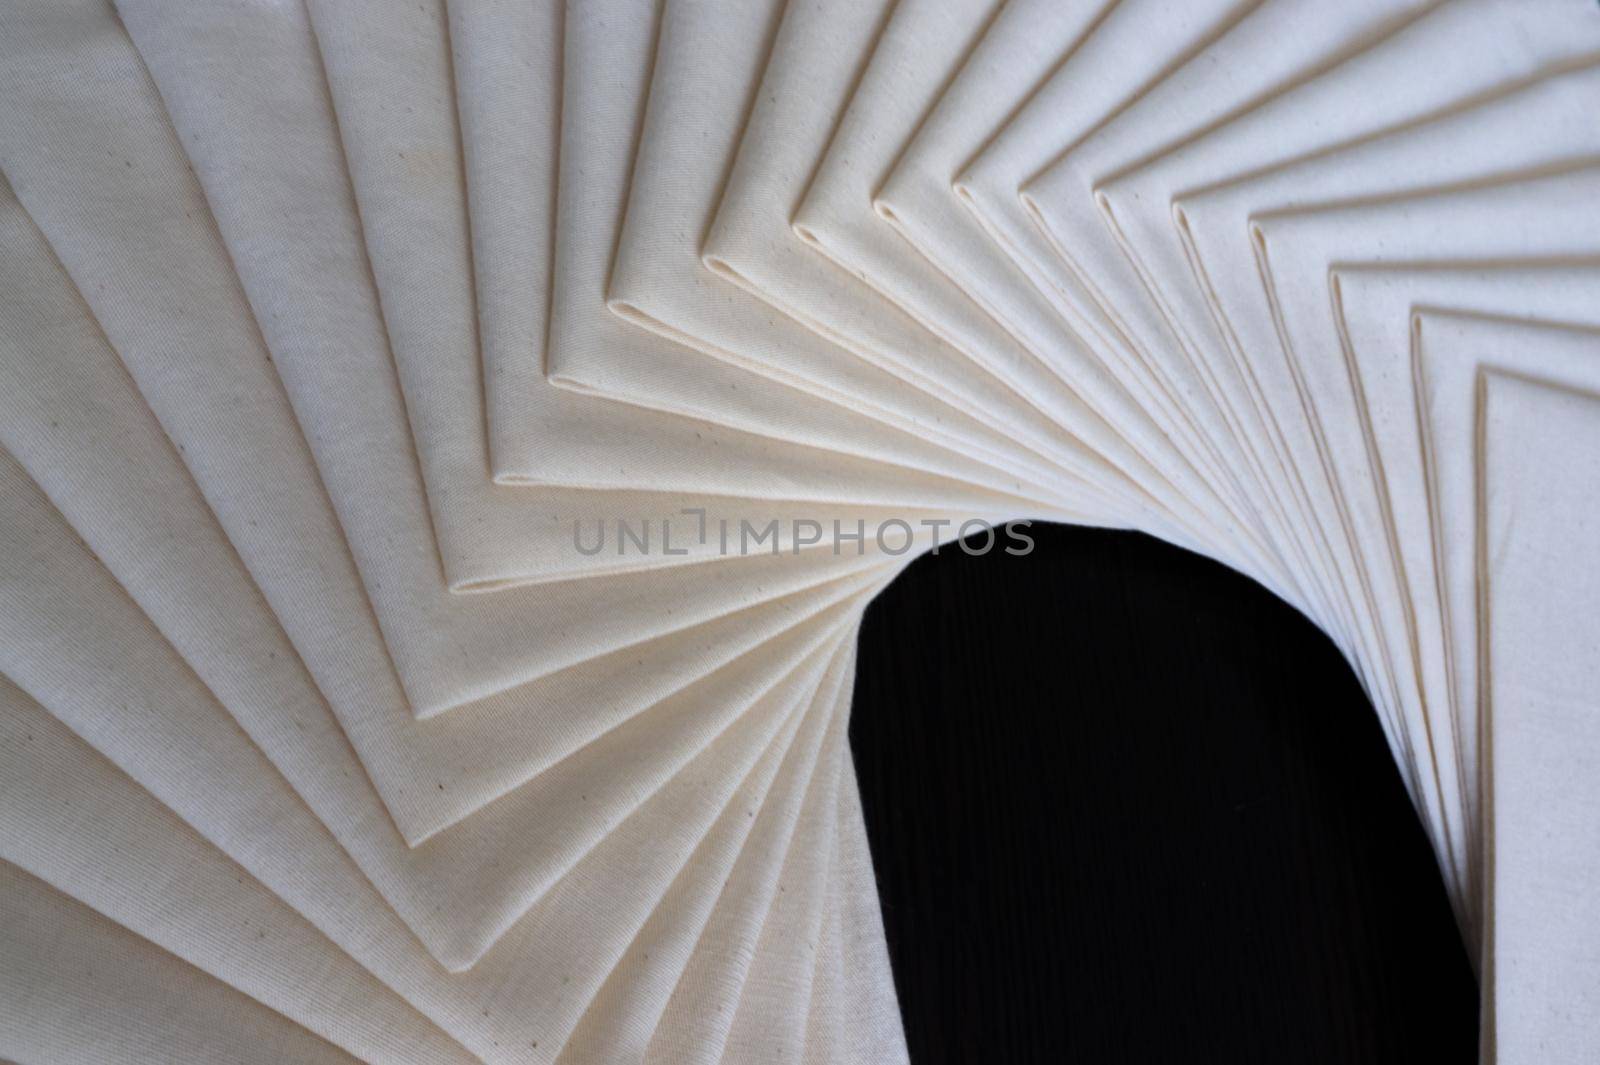 White Fabric folded of stacked . Fabric texture background